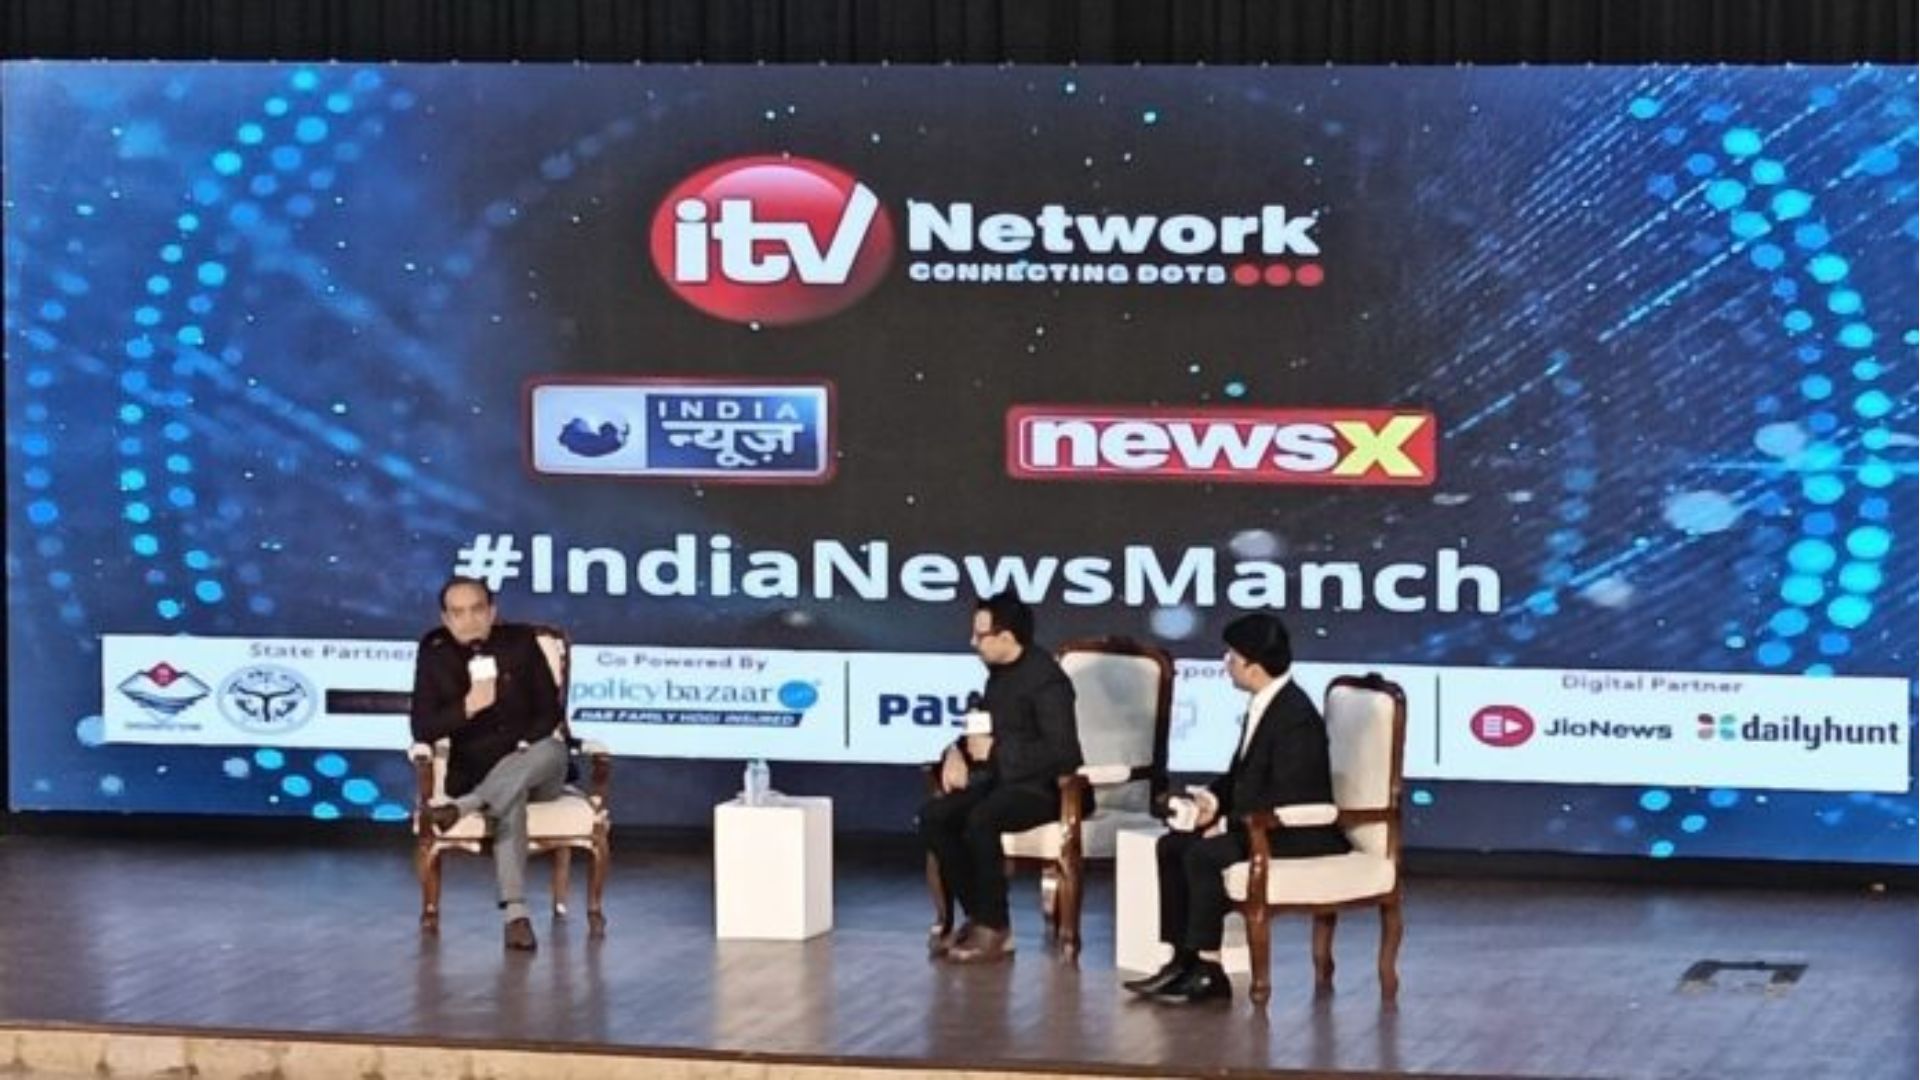 India News Manch 2023: Opposition Targets Indian Culture; Sudhanshu Trivedi Counters on Sanatan Principles